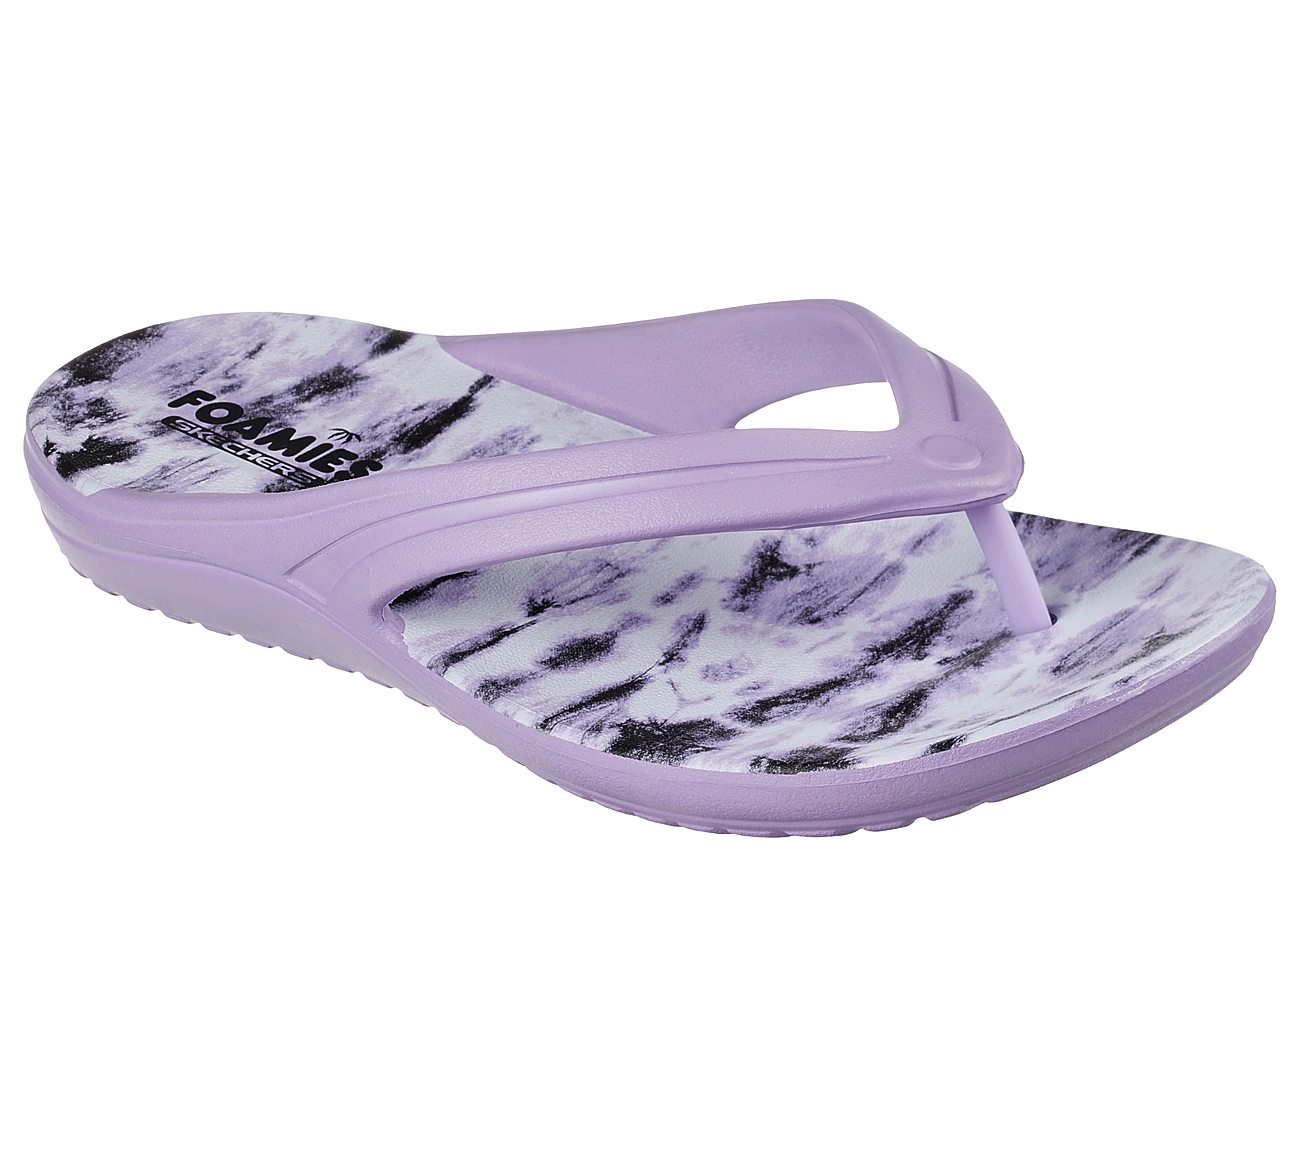 BAY BREEZE - SUNSET DREAMS, LAVENDER Footwear Right View